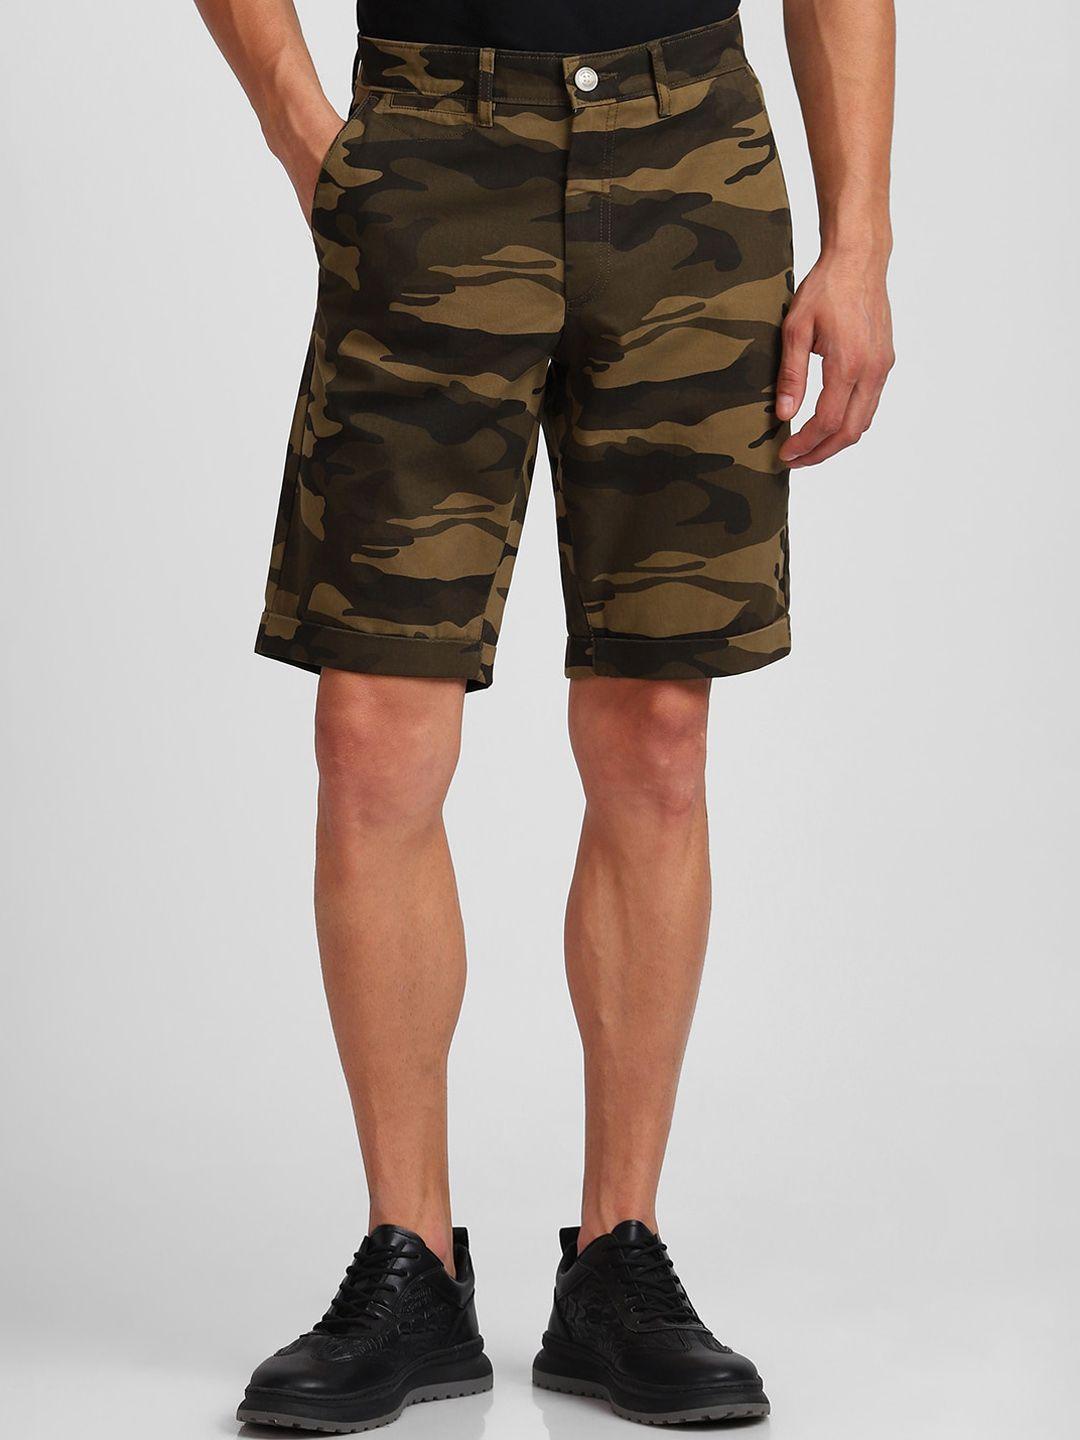 Allen Solly Men Camouflage Printed Slim Fit Pure Cotton Shorts